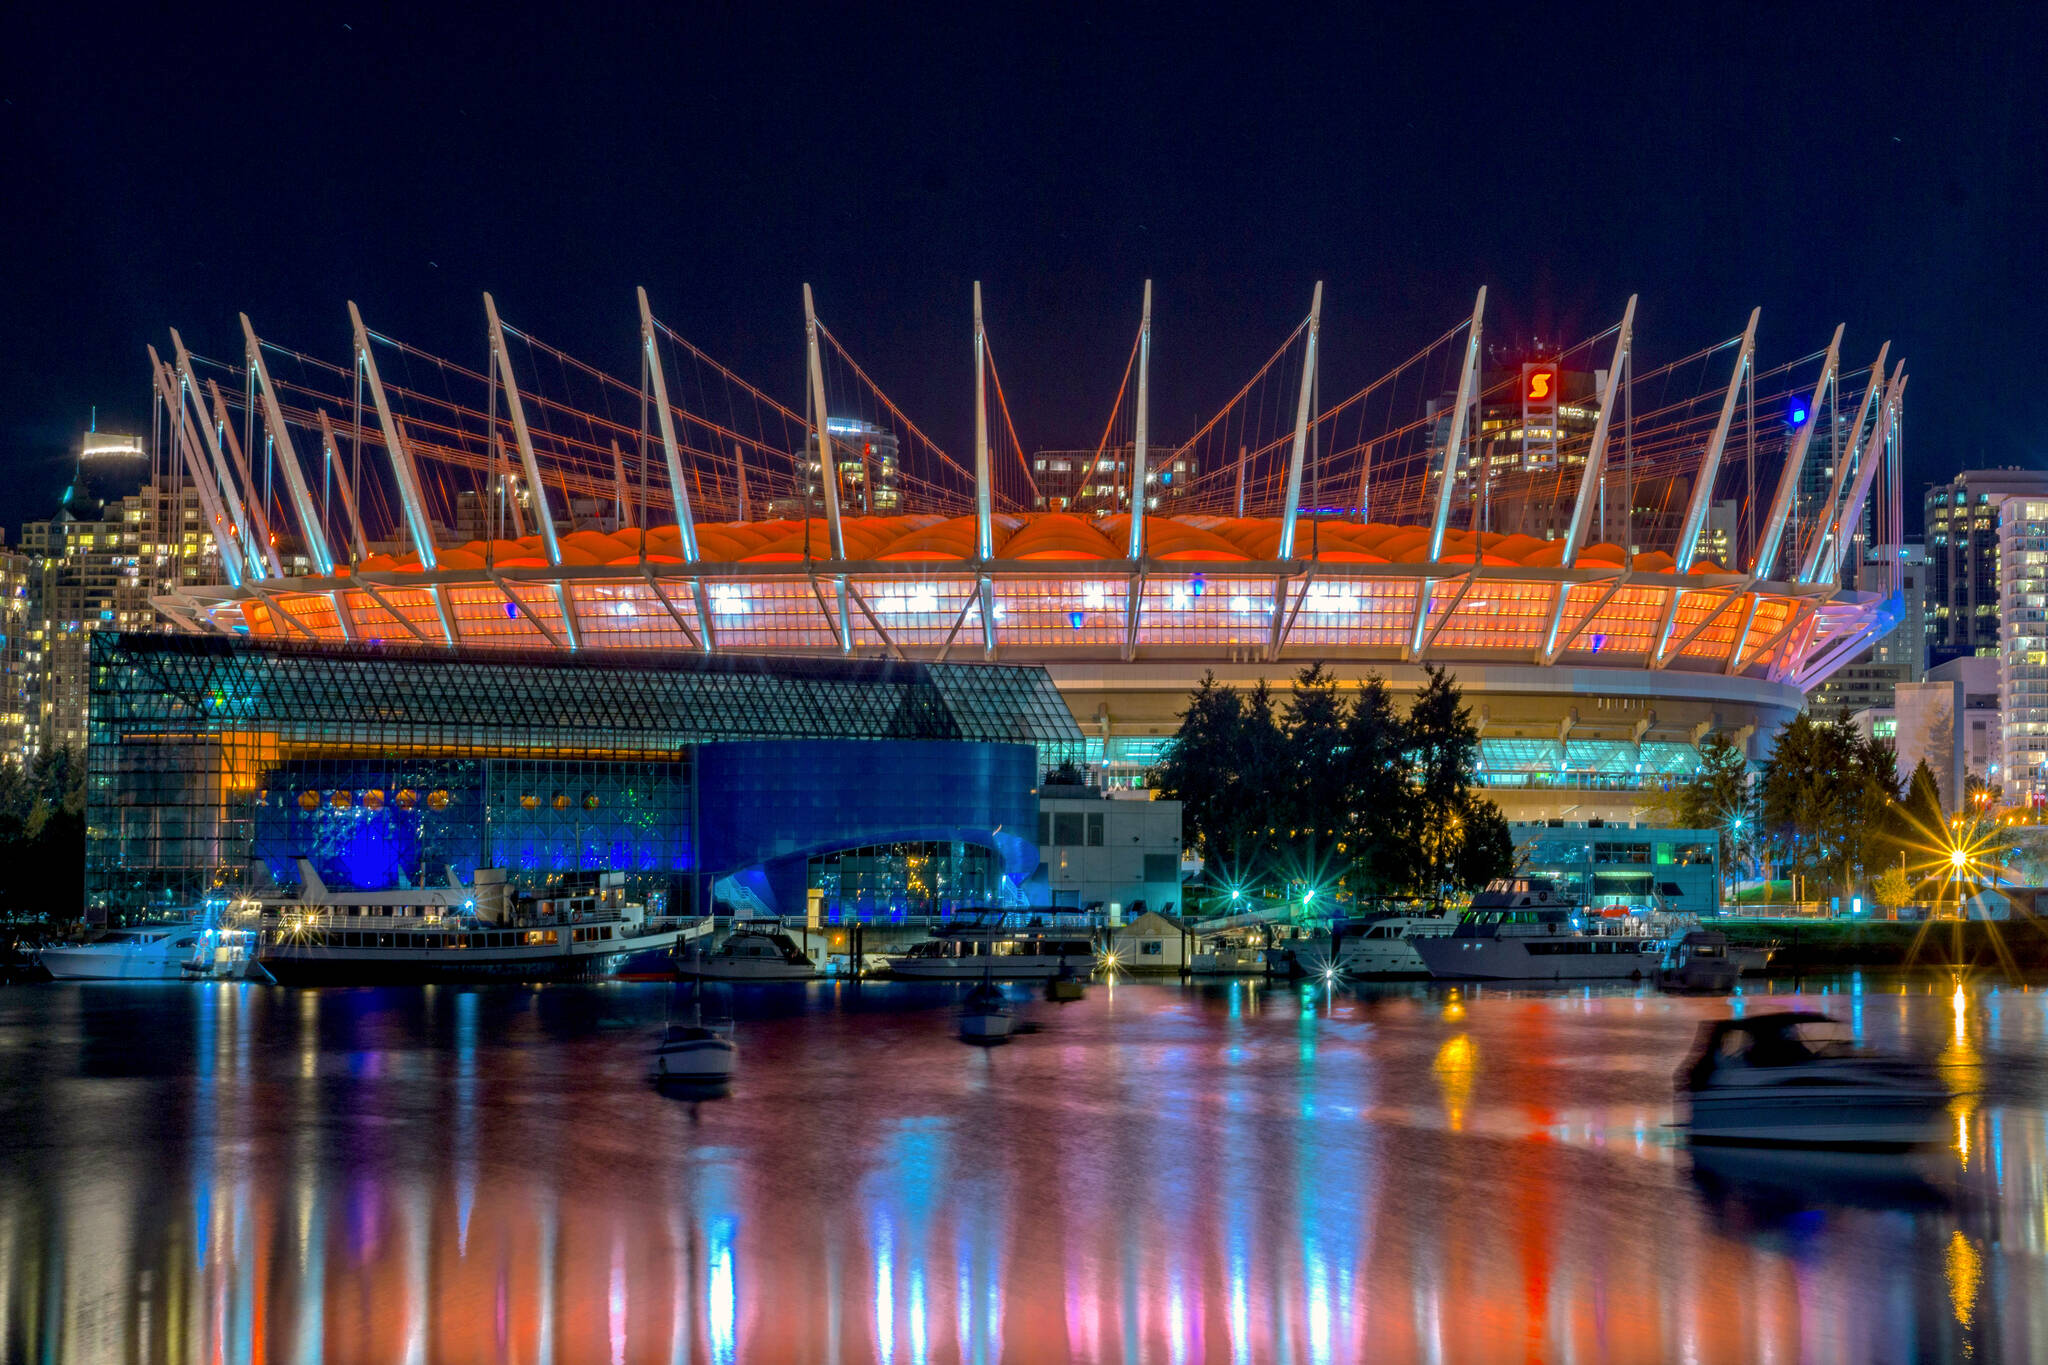 BC Place Stadium will host seven games including two games featuring Canada’s Men’s National Soccer Team when FIFA’s Men’s World Cup, comes to North America. Figures released show direct costs will exceed direct revenues from hosting the games between $100 to $145 million with the province funding the difference funding out of contingencies. A report published in 2019 also raises questions about the effectiveness of promoting tourism through mega-events like the world’s largest soccer tournament. (Ryan Adams/Wikimedia Commons)